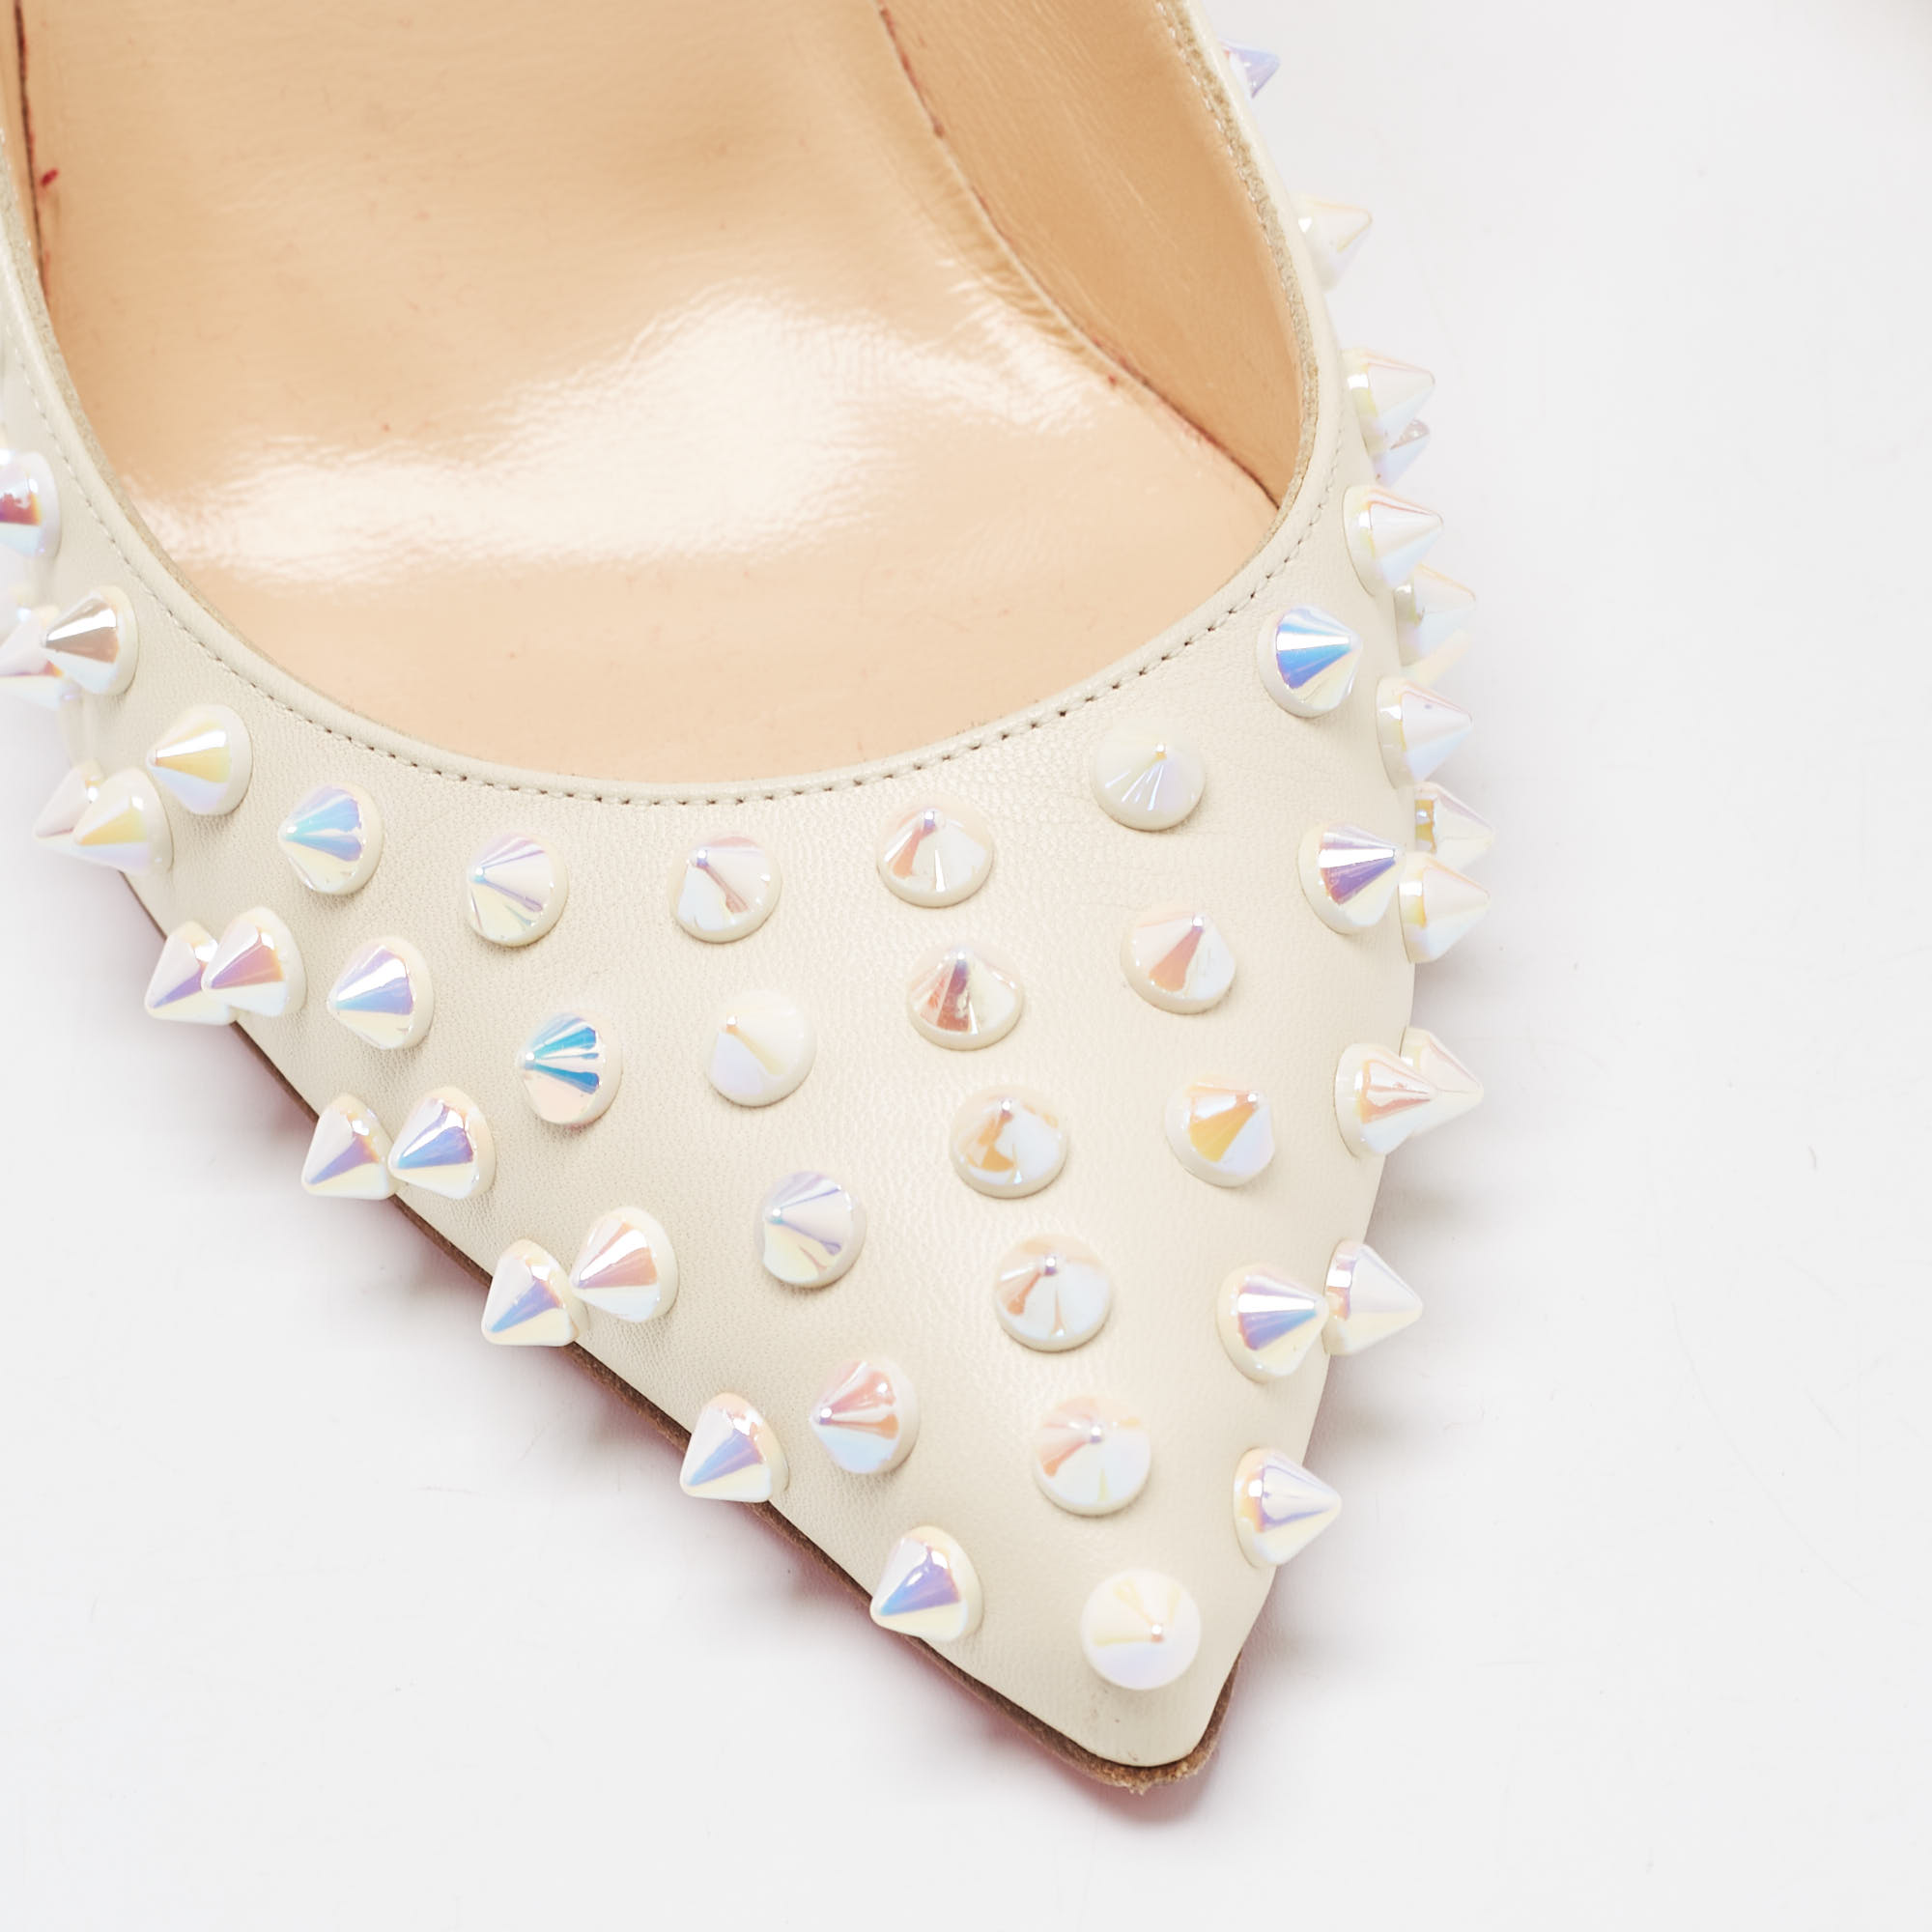 Christian Louboutin Cream Leather Pigalle Spikes Pumps Size 38